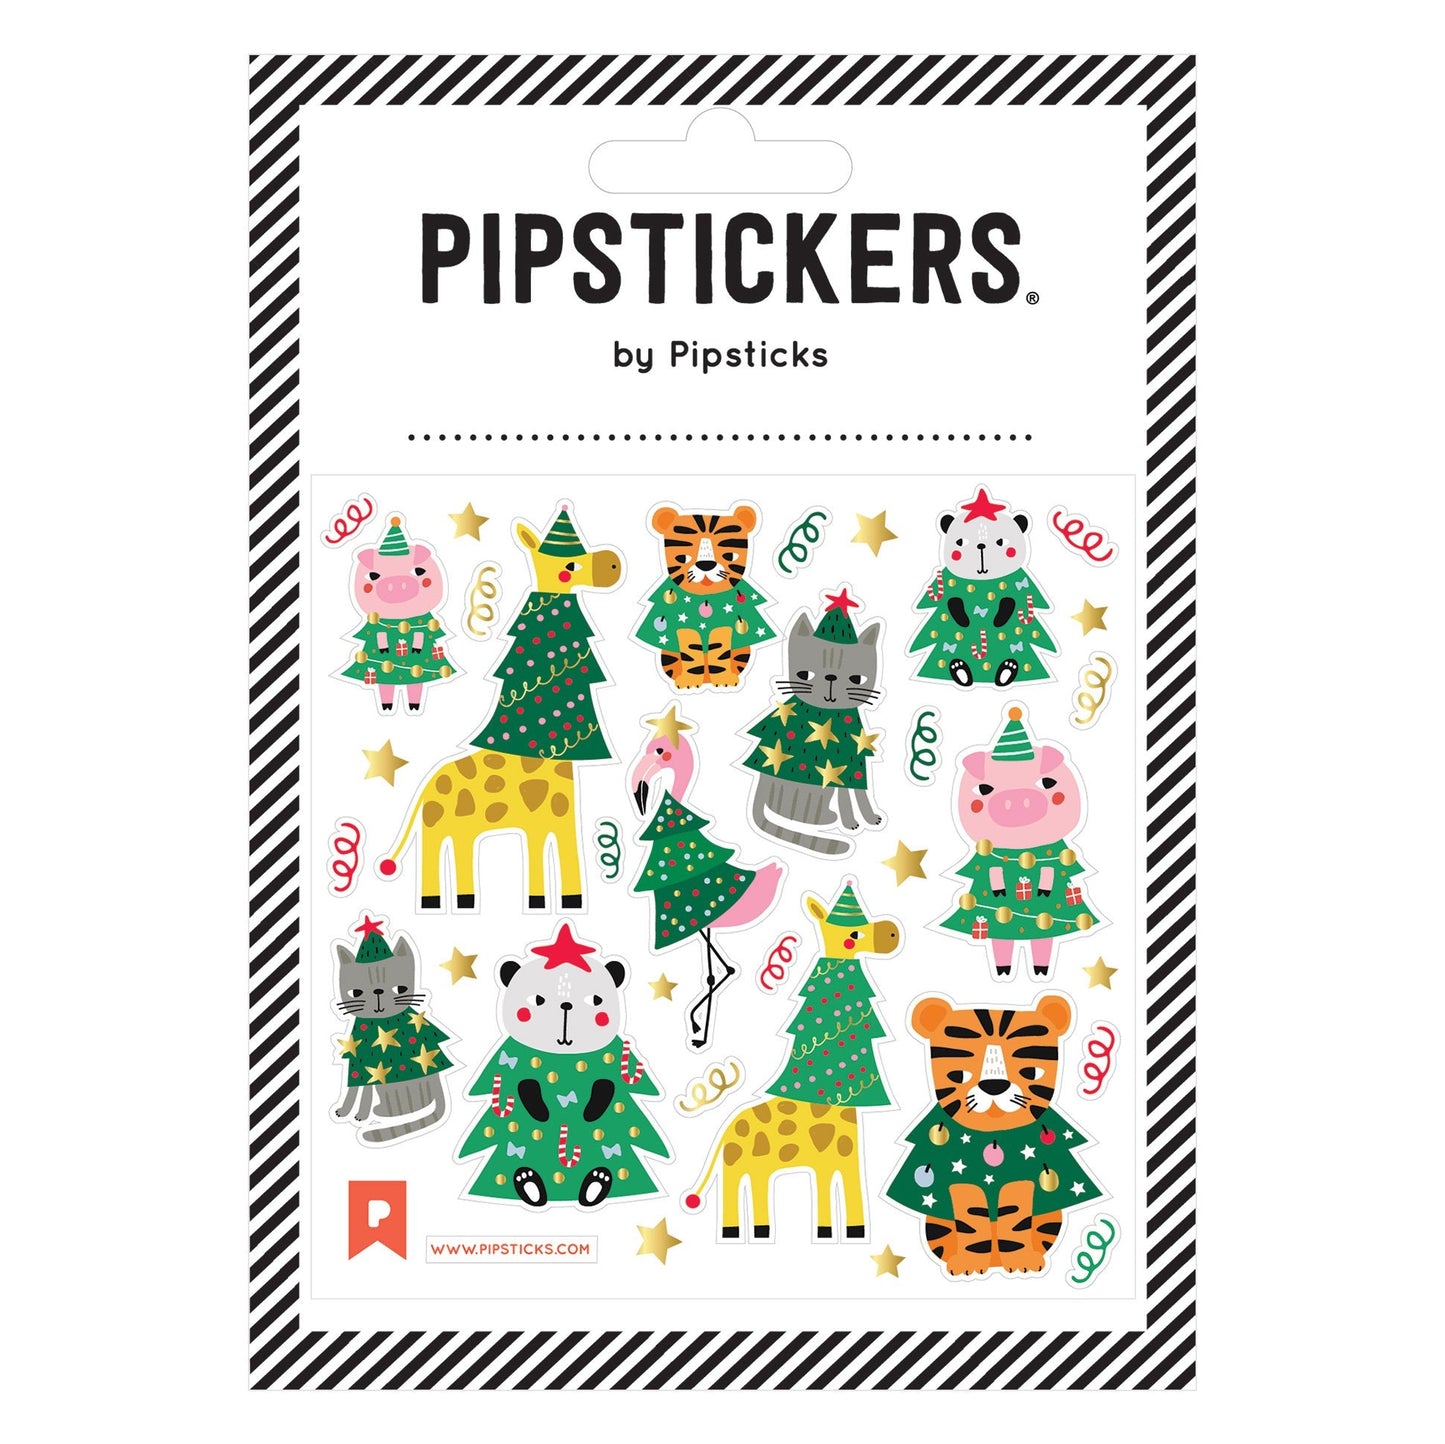 Tree-mendously Cute PipStickers